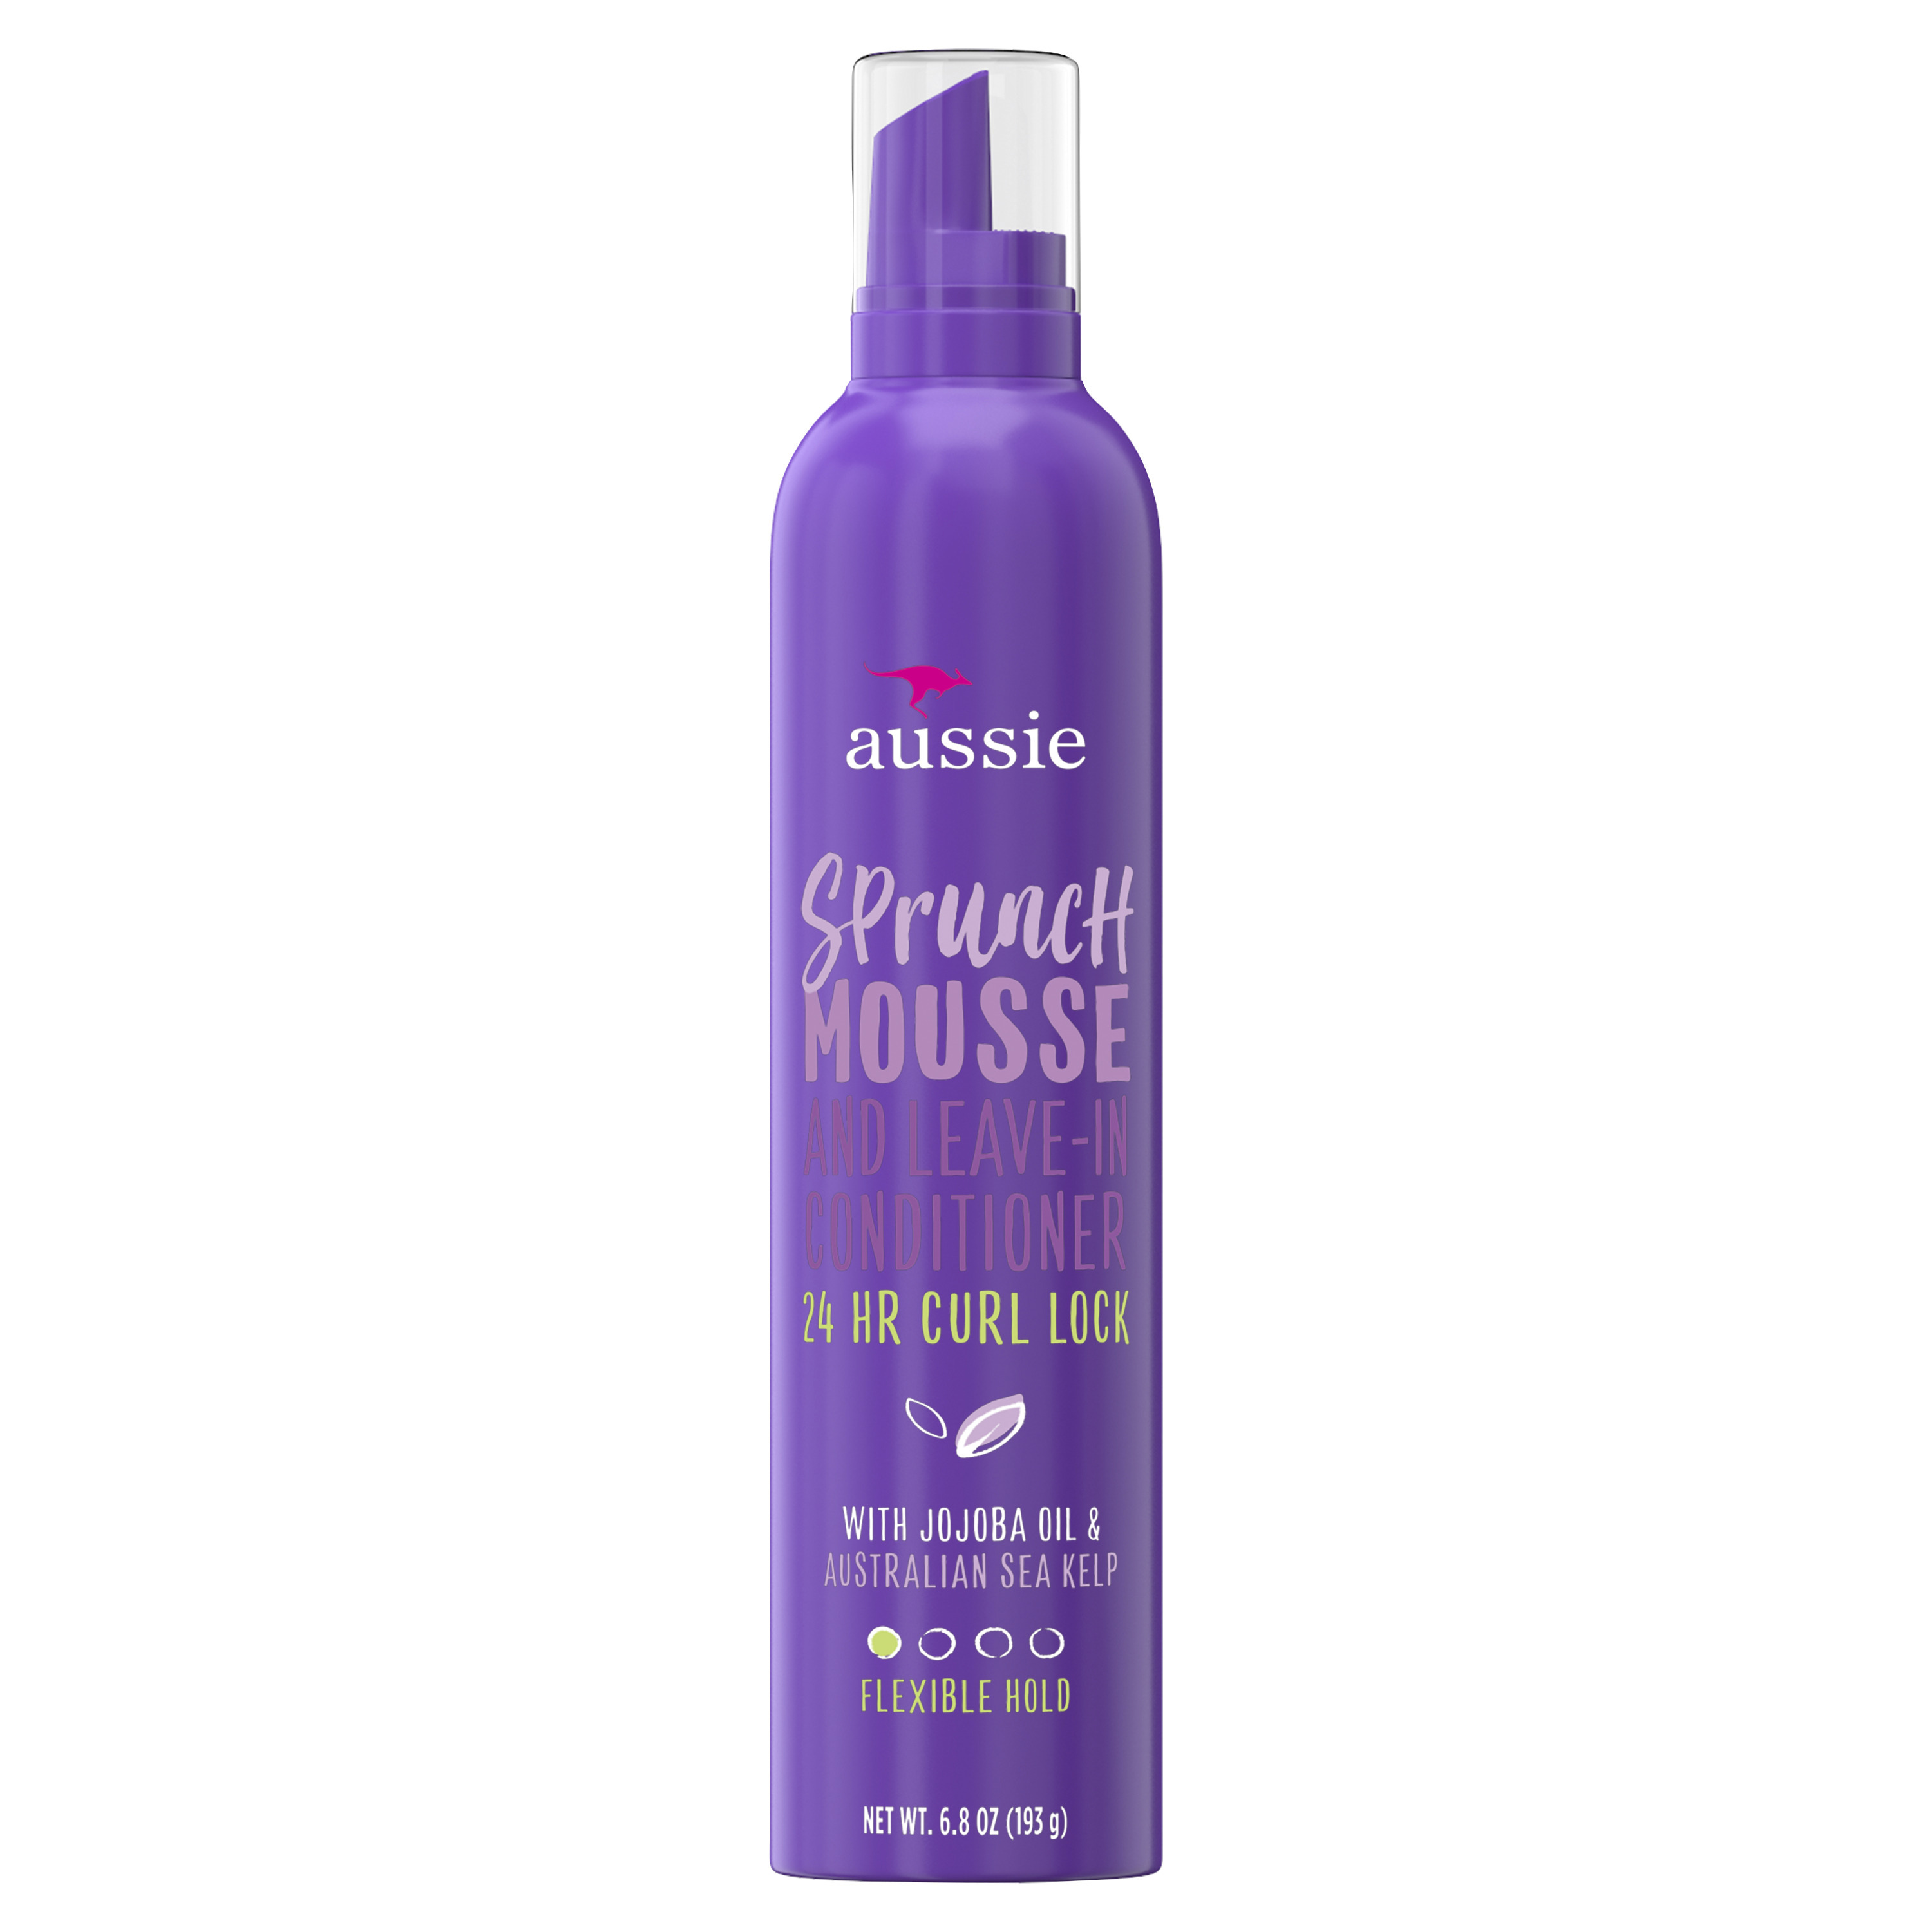 Aussie Sprunch Mousse and Leave-In Conditioner, Flexible Hold, 6.8 oz - image 3 of 9